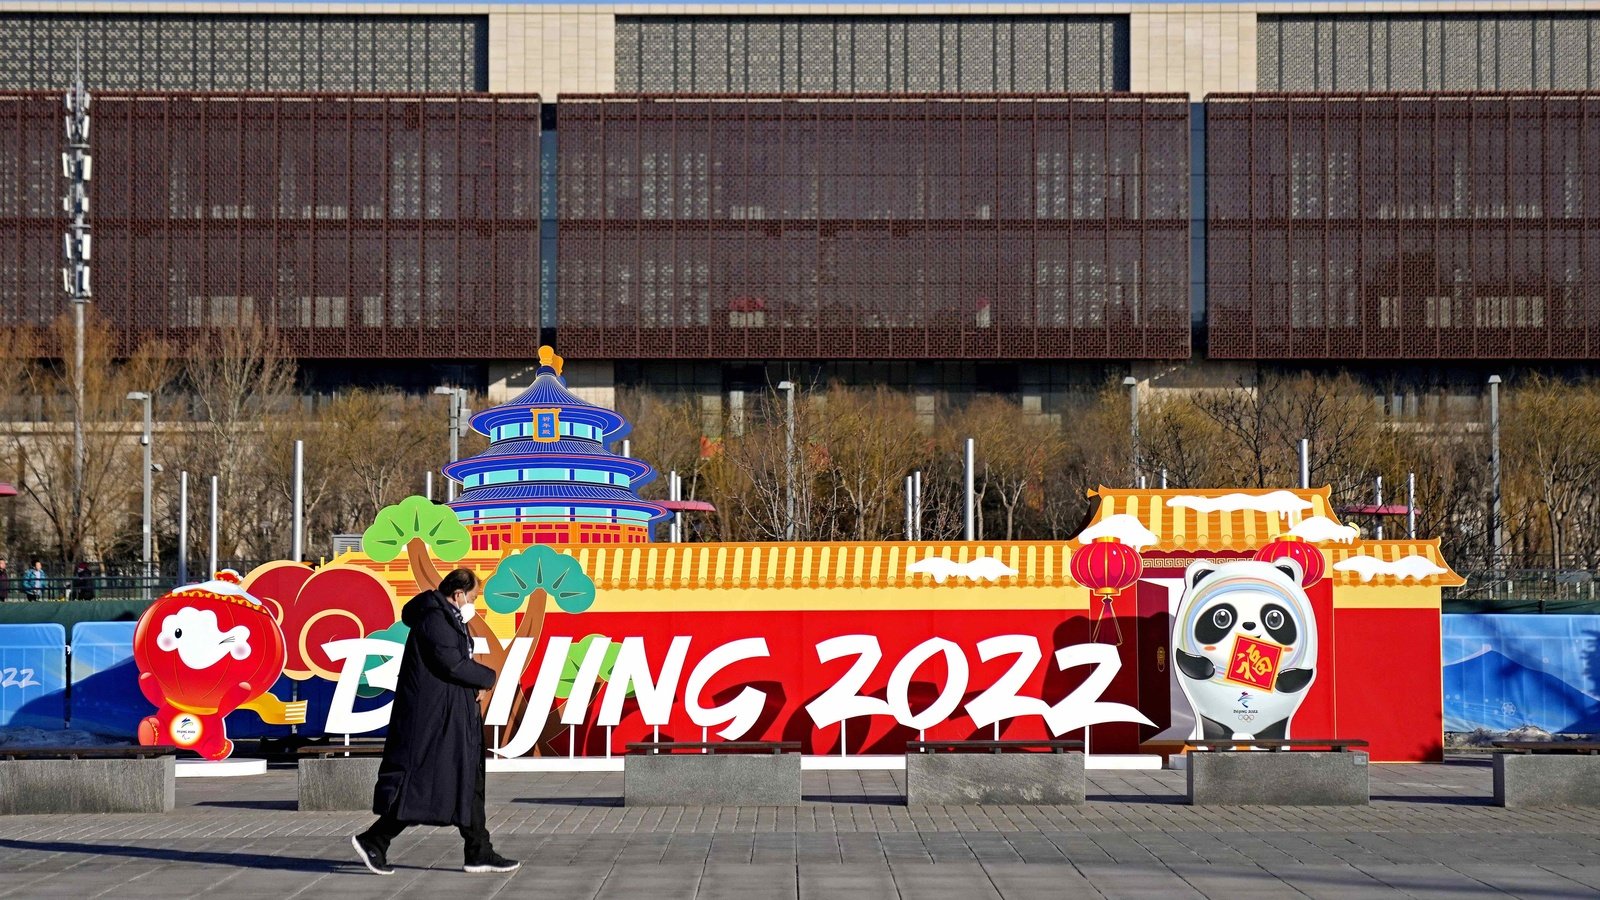 Beijing 2022 Winter Olympic Games Candidate City Presentation